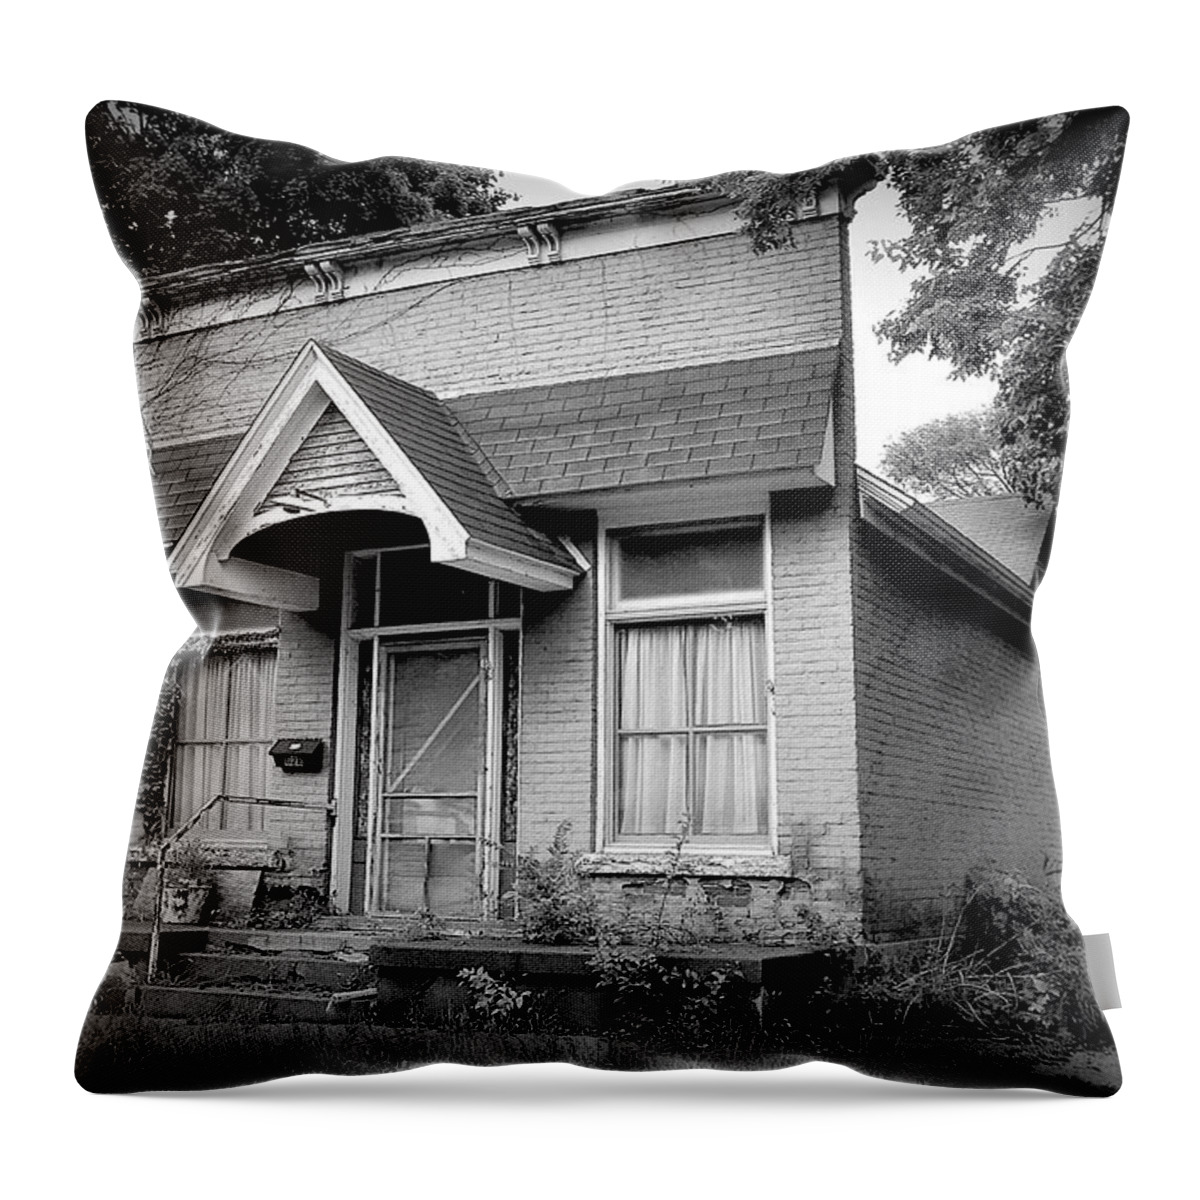 Black And White Throw Pillow featuring the photograph Store Front Home by Wild Thing